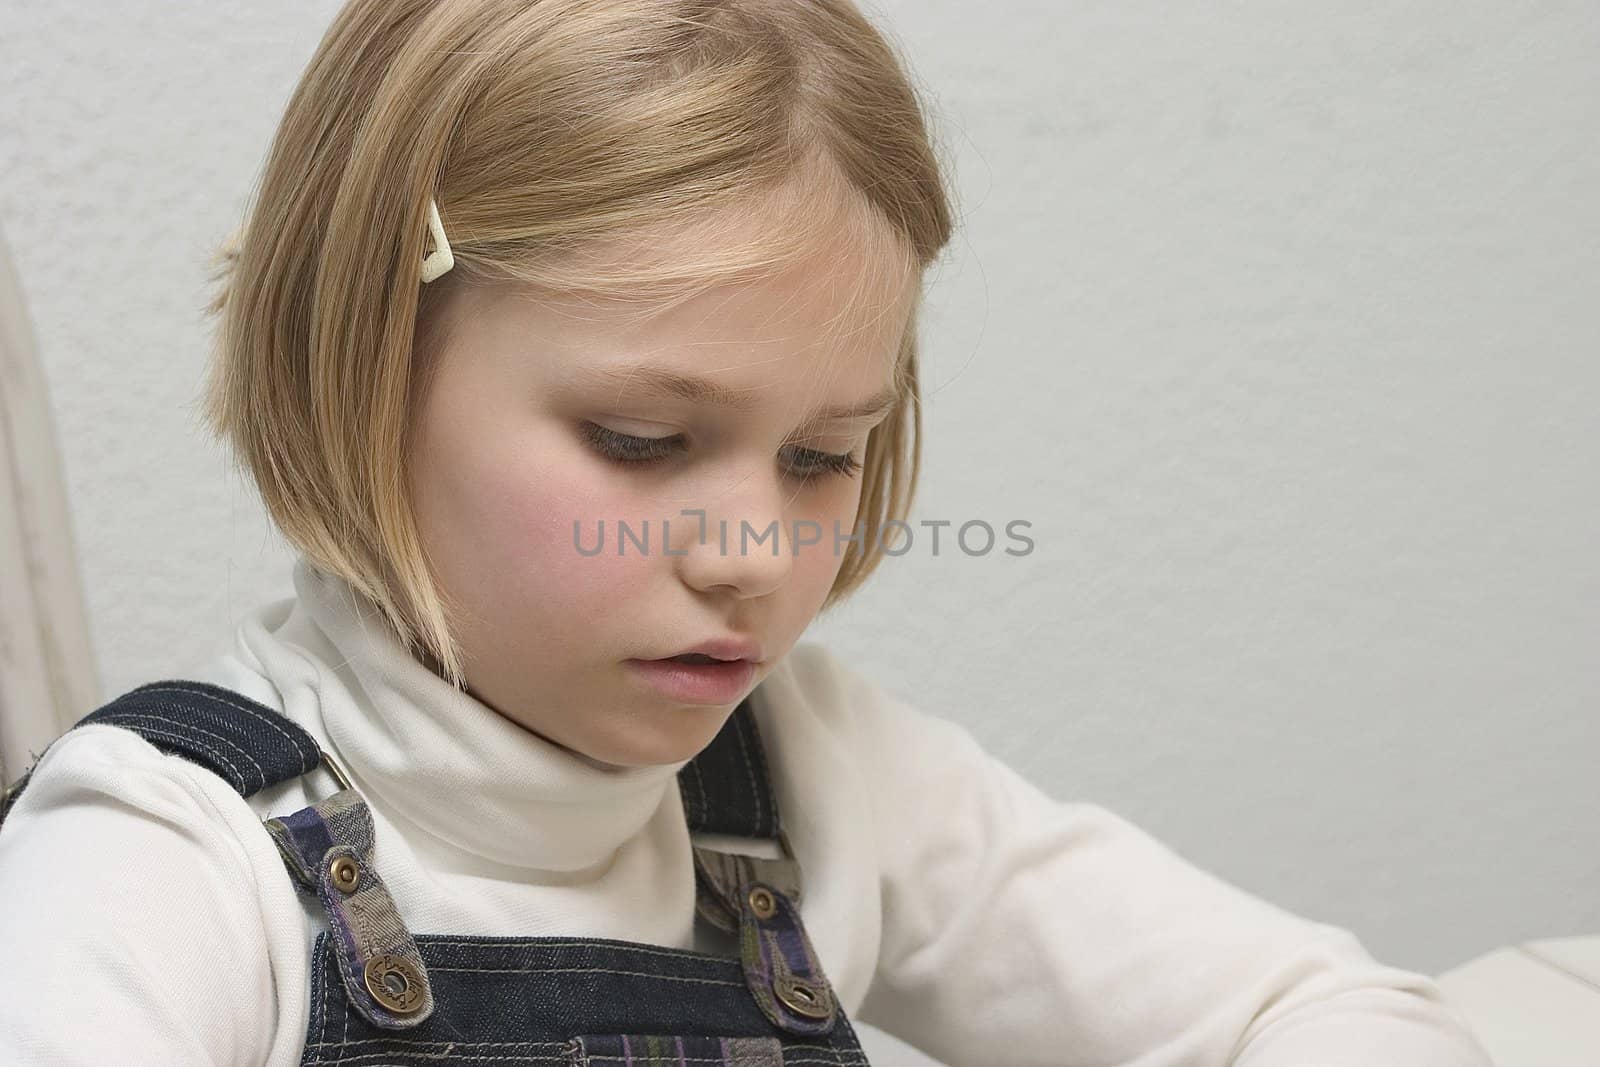 Child at the table arranges Jigsaws